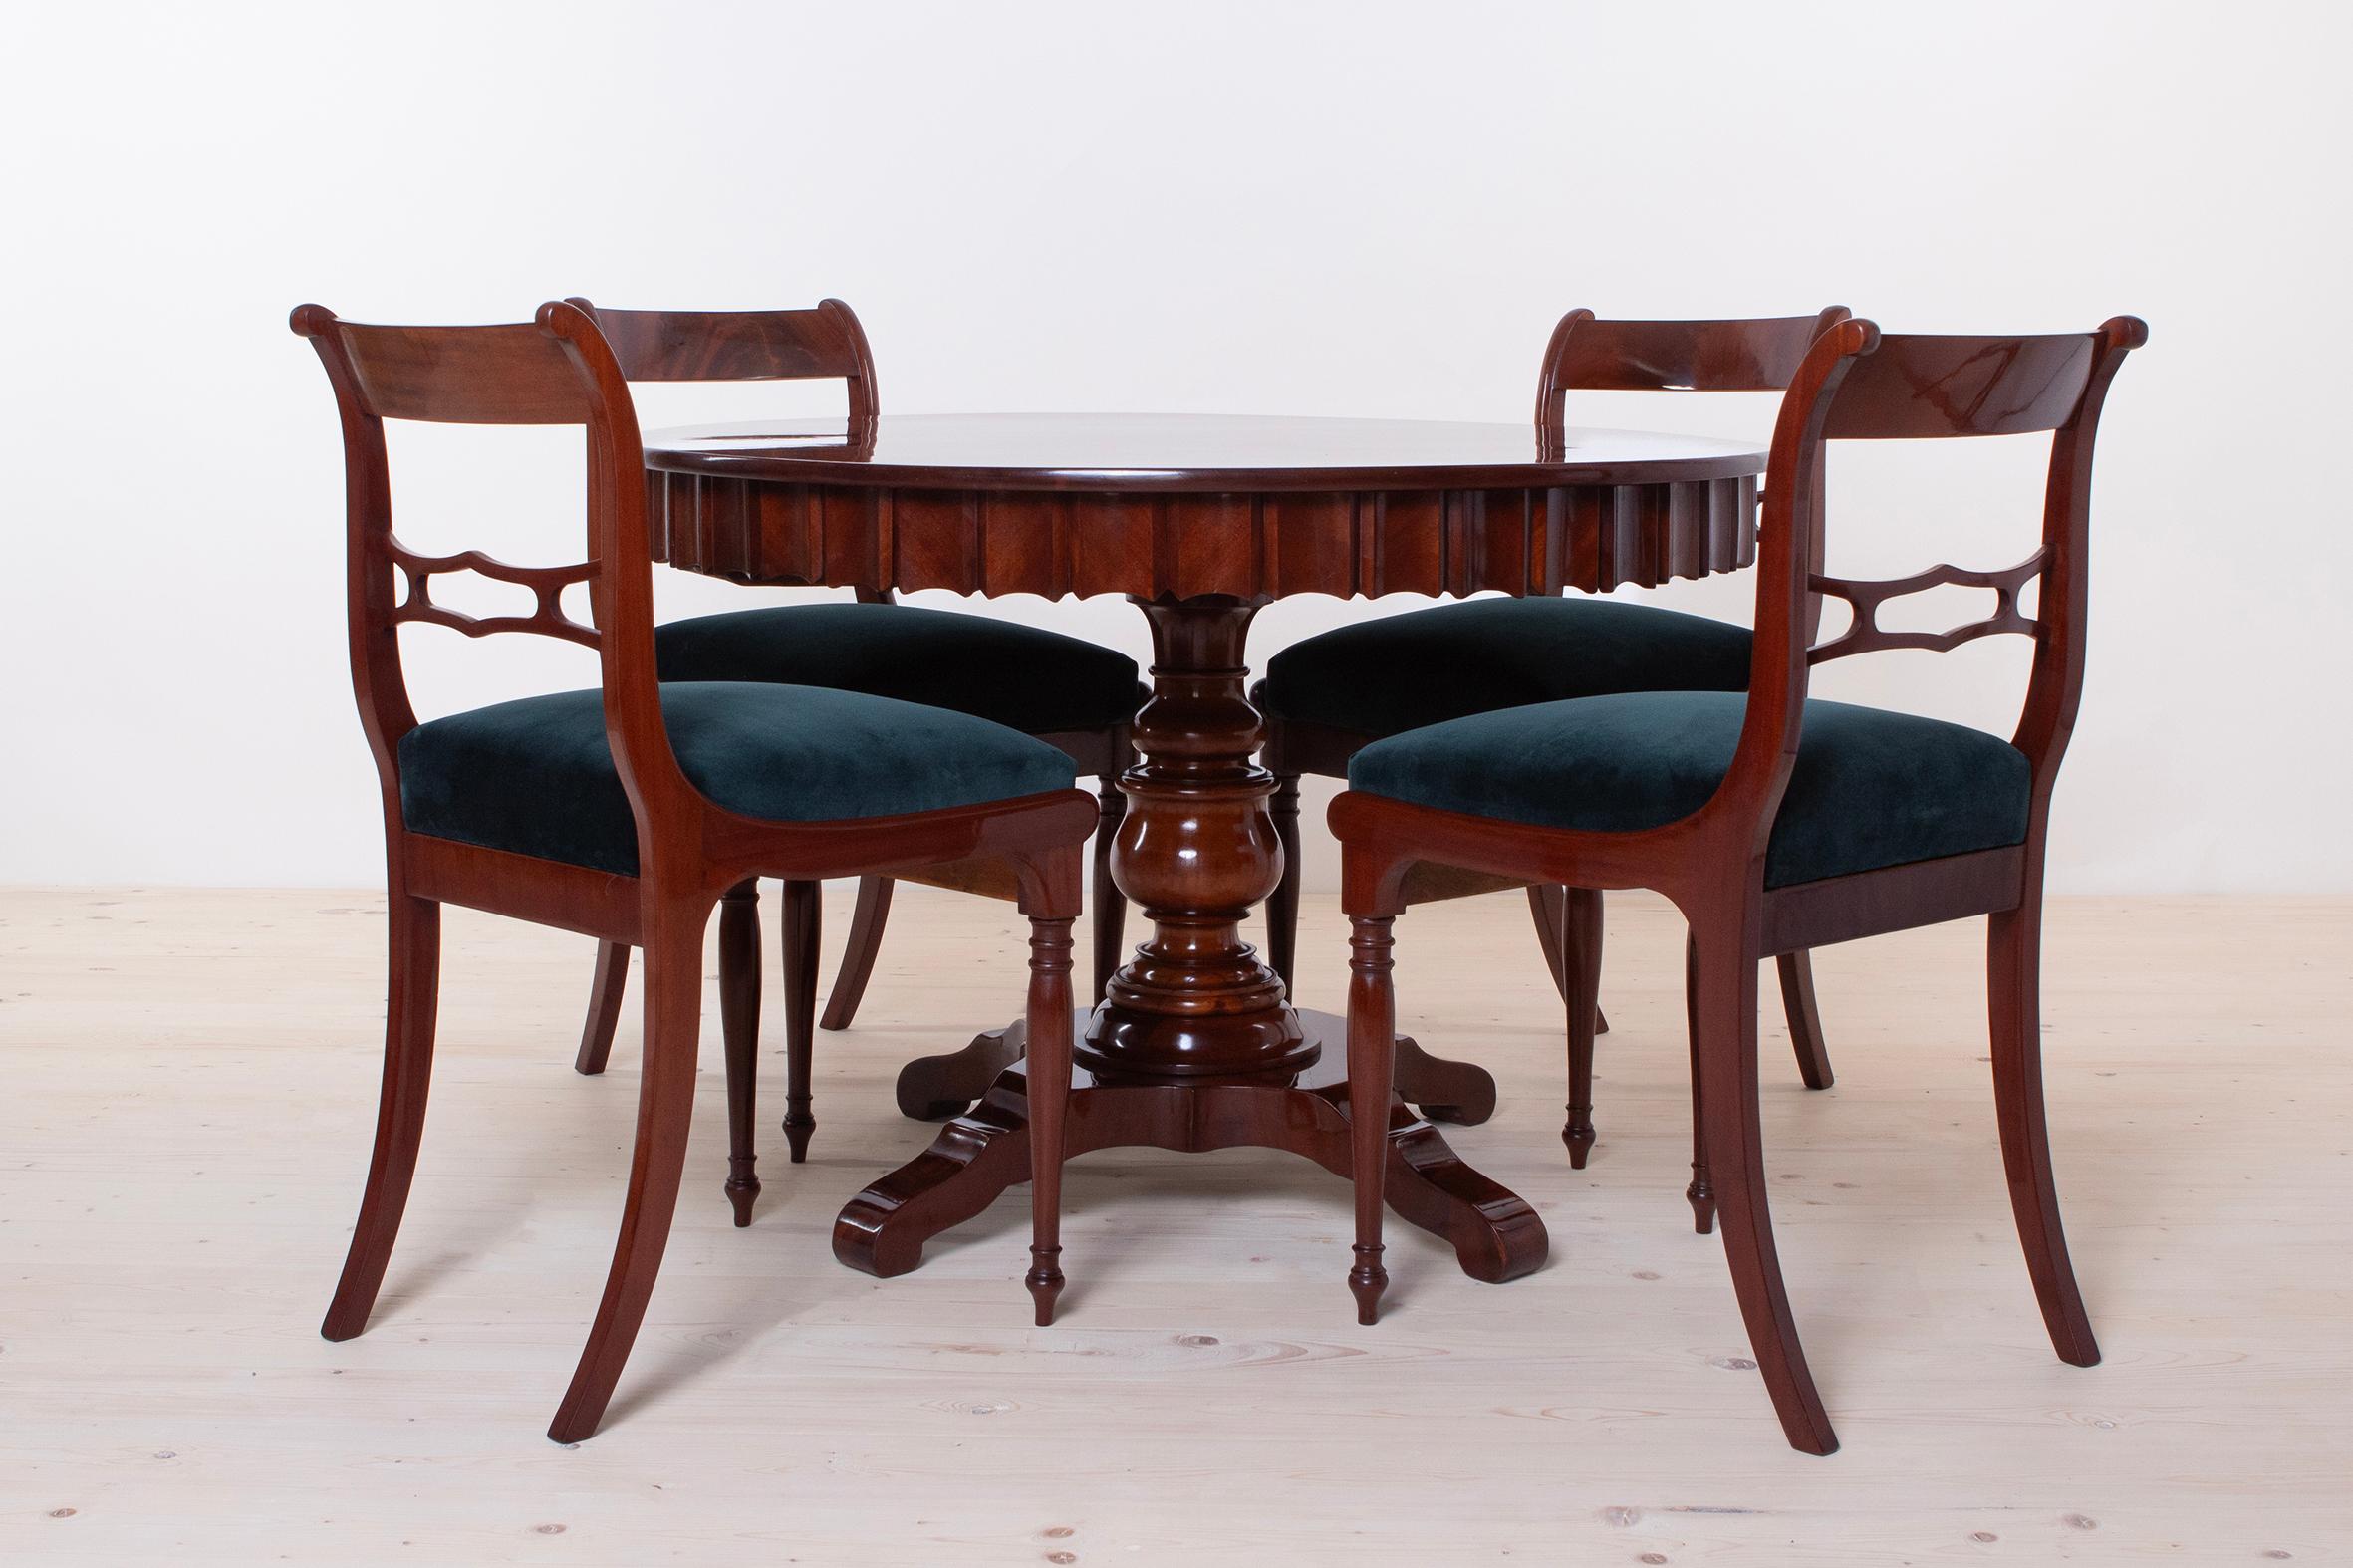 Polished Biedermeier Dining Set, Round Table, 4 Chairs, Fully Restored, 19th Century For Sale